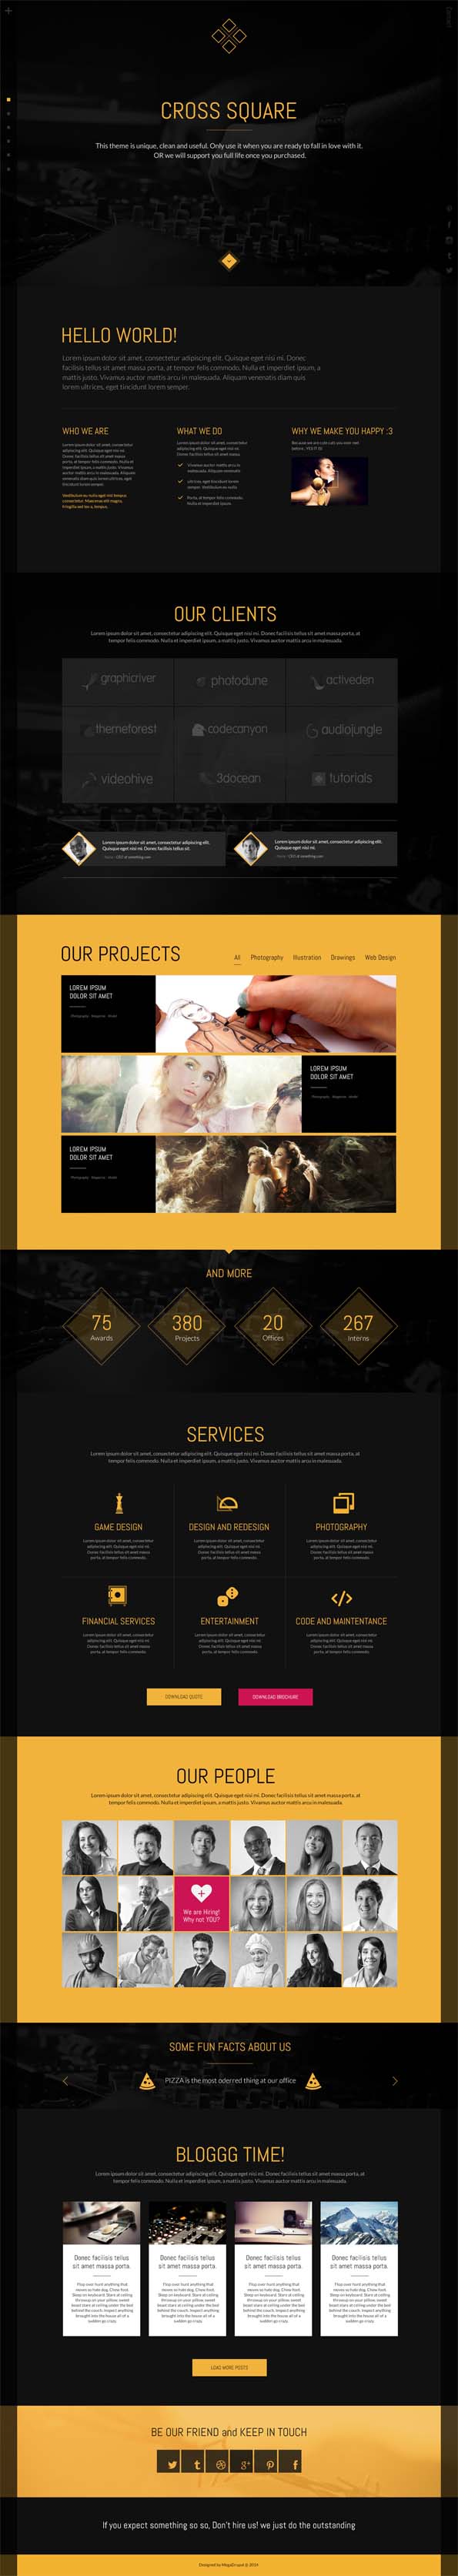  PSD Template Of the Day #01 - CrossSquare 